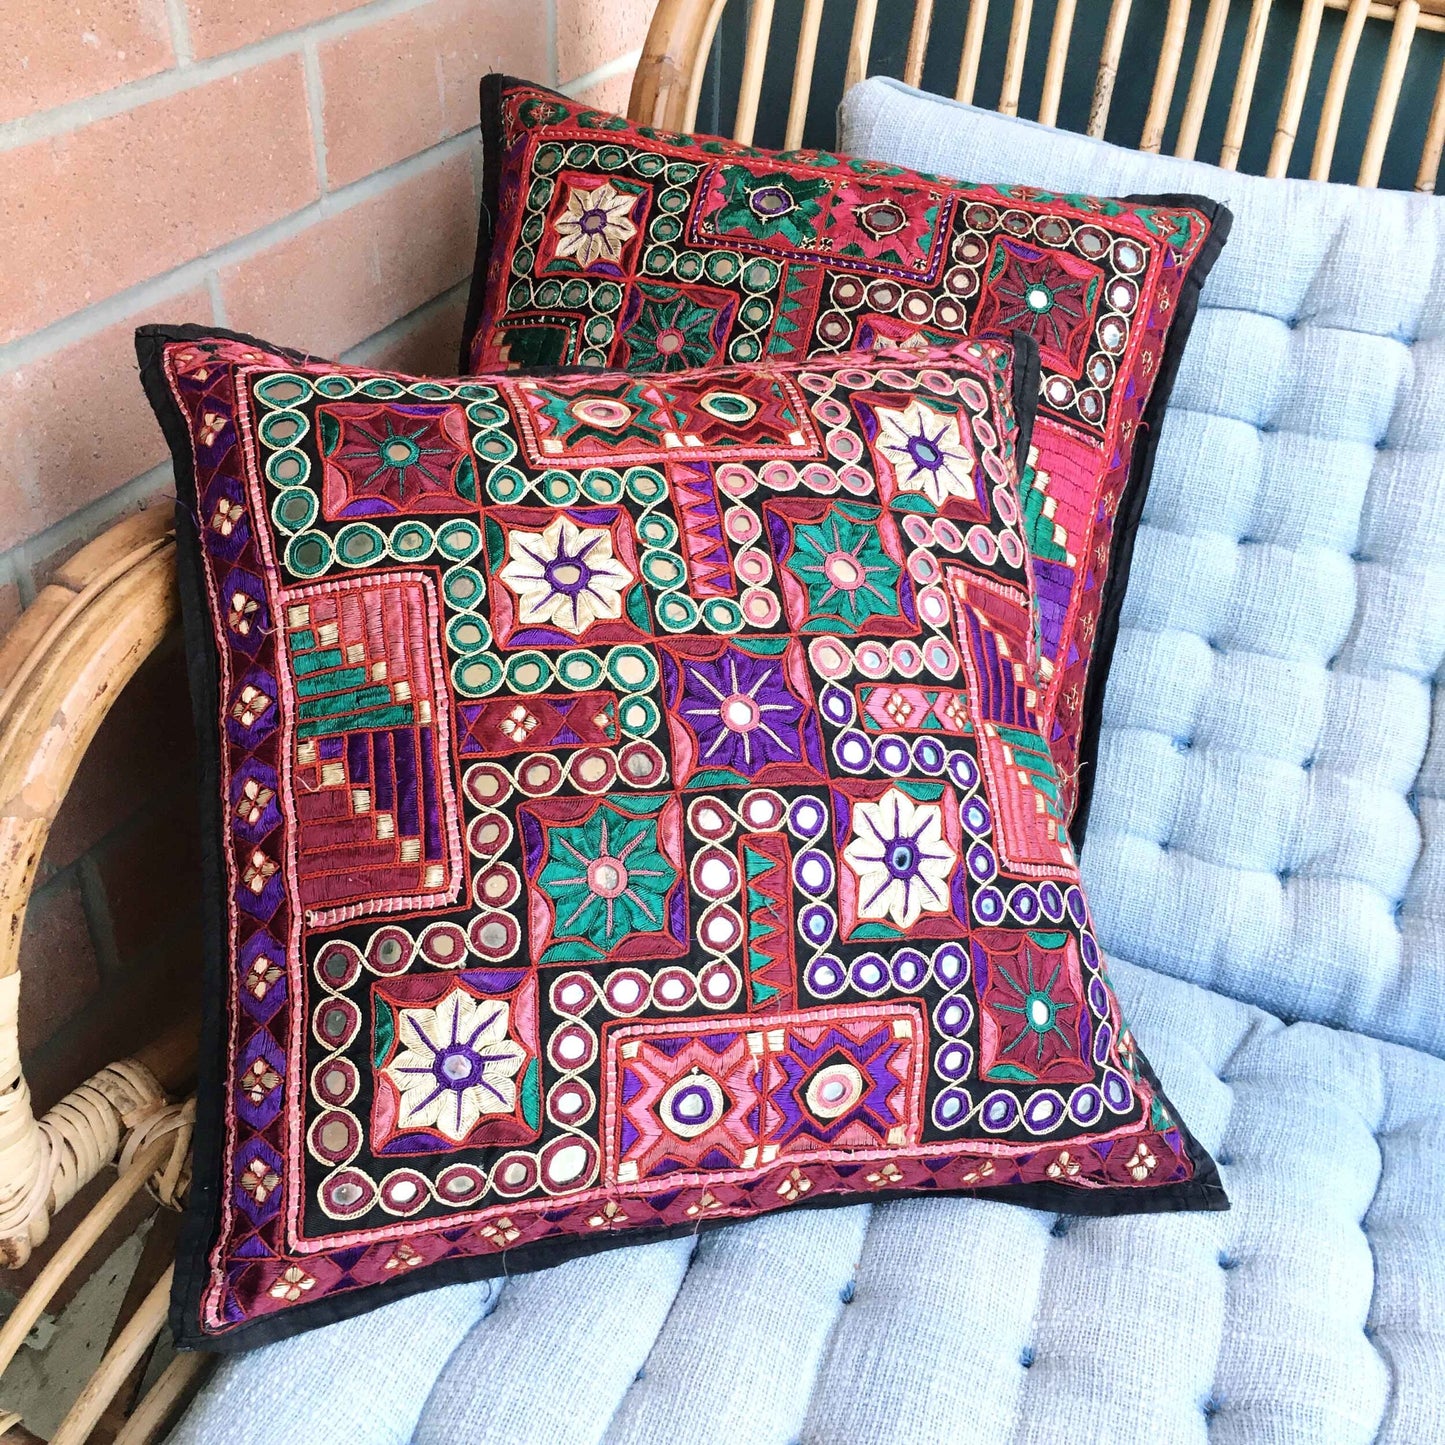 Vintage Indian hand-embroidered mirror boho pillow cases - set of 2